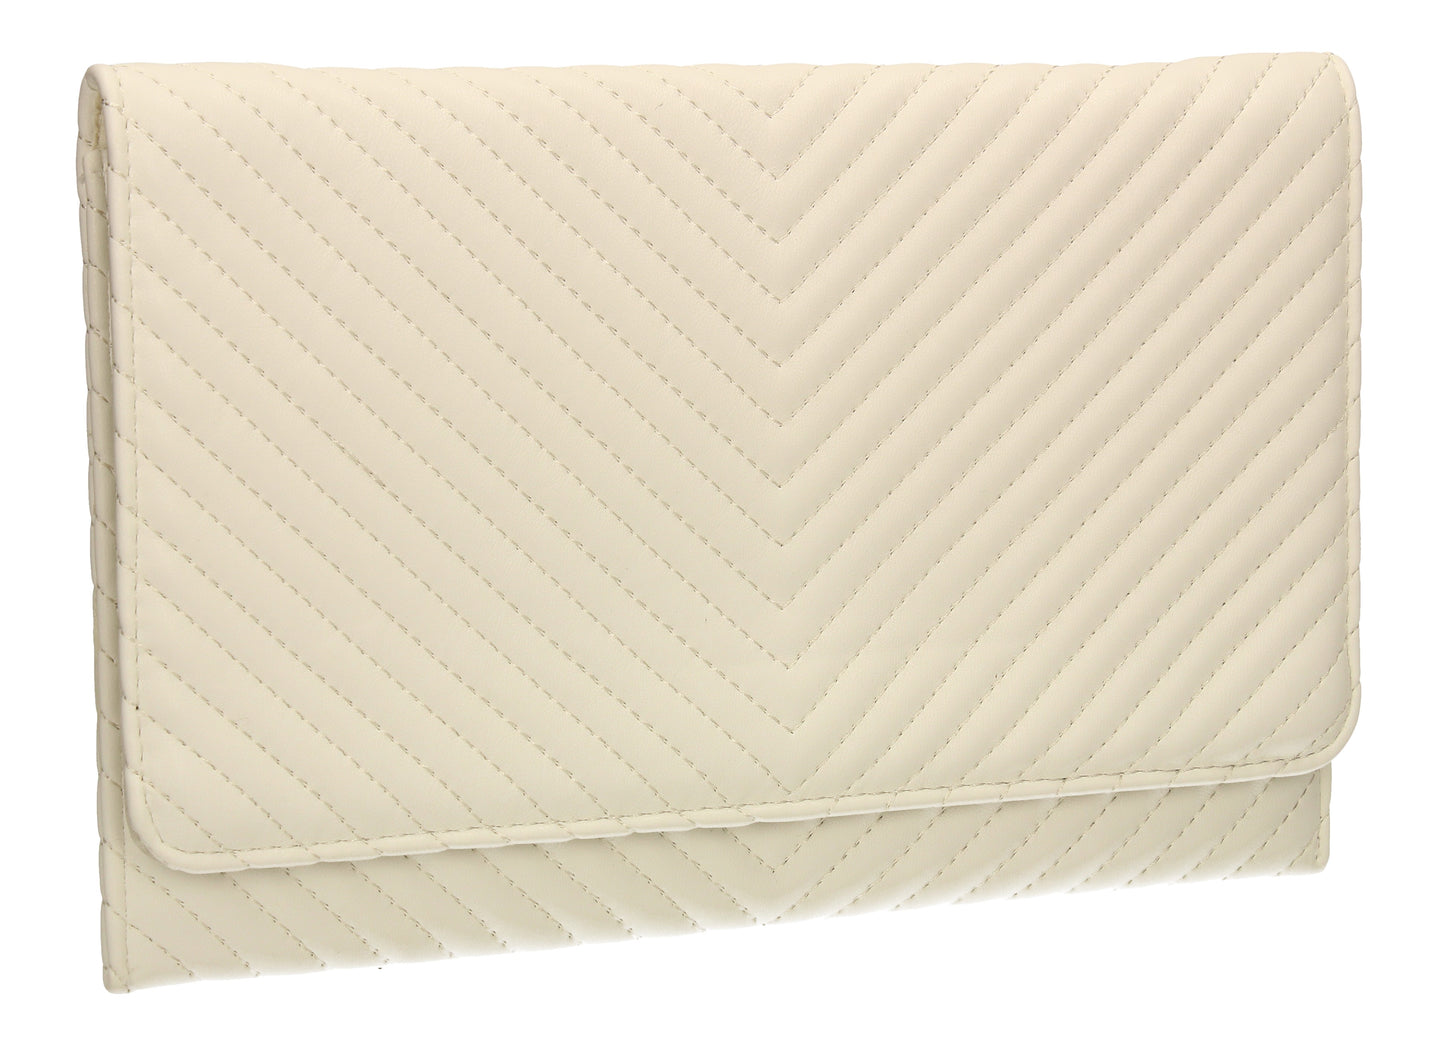 SWANKYSWANS Emmy Flapover Clutch Bag White Cute Cheap Clutch Bag For Weddings School and Work